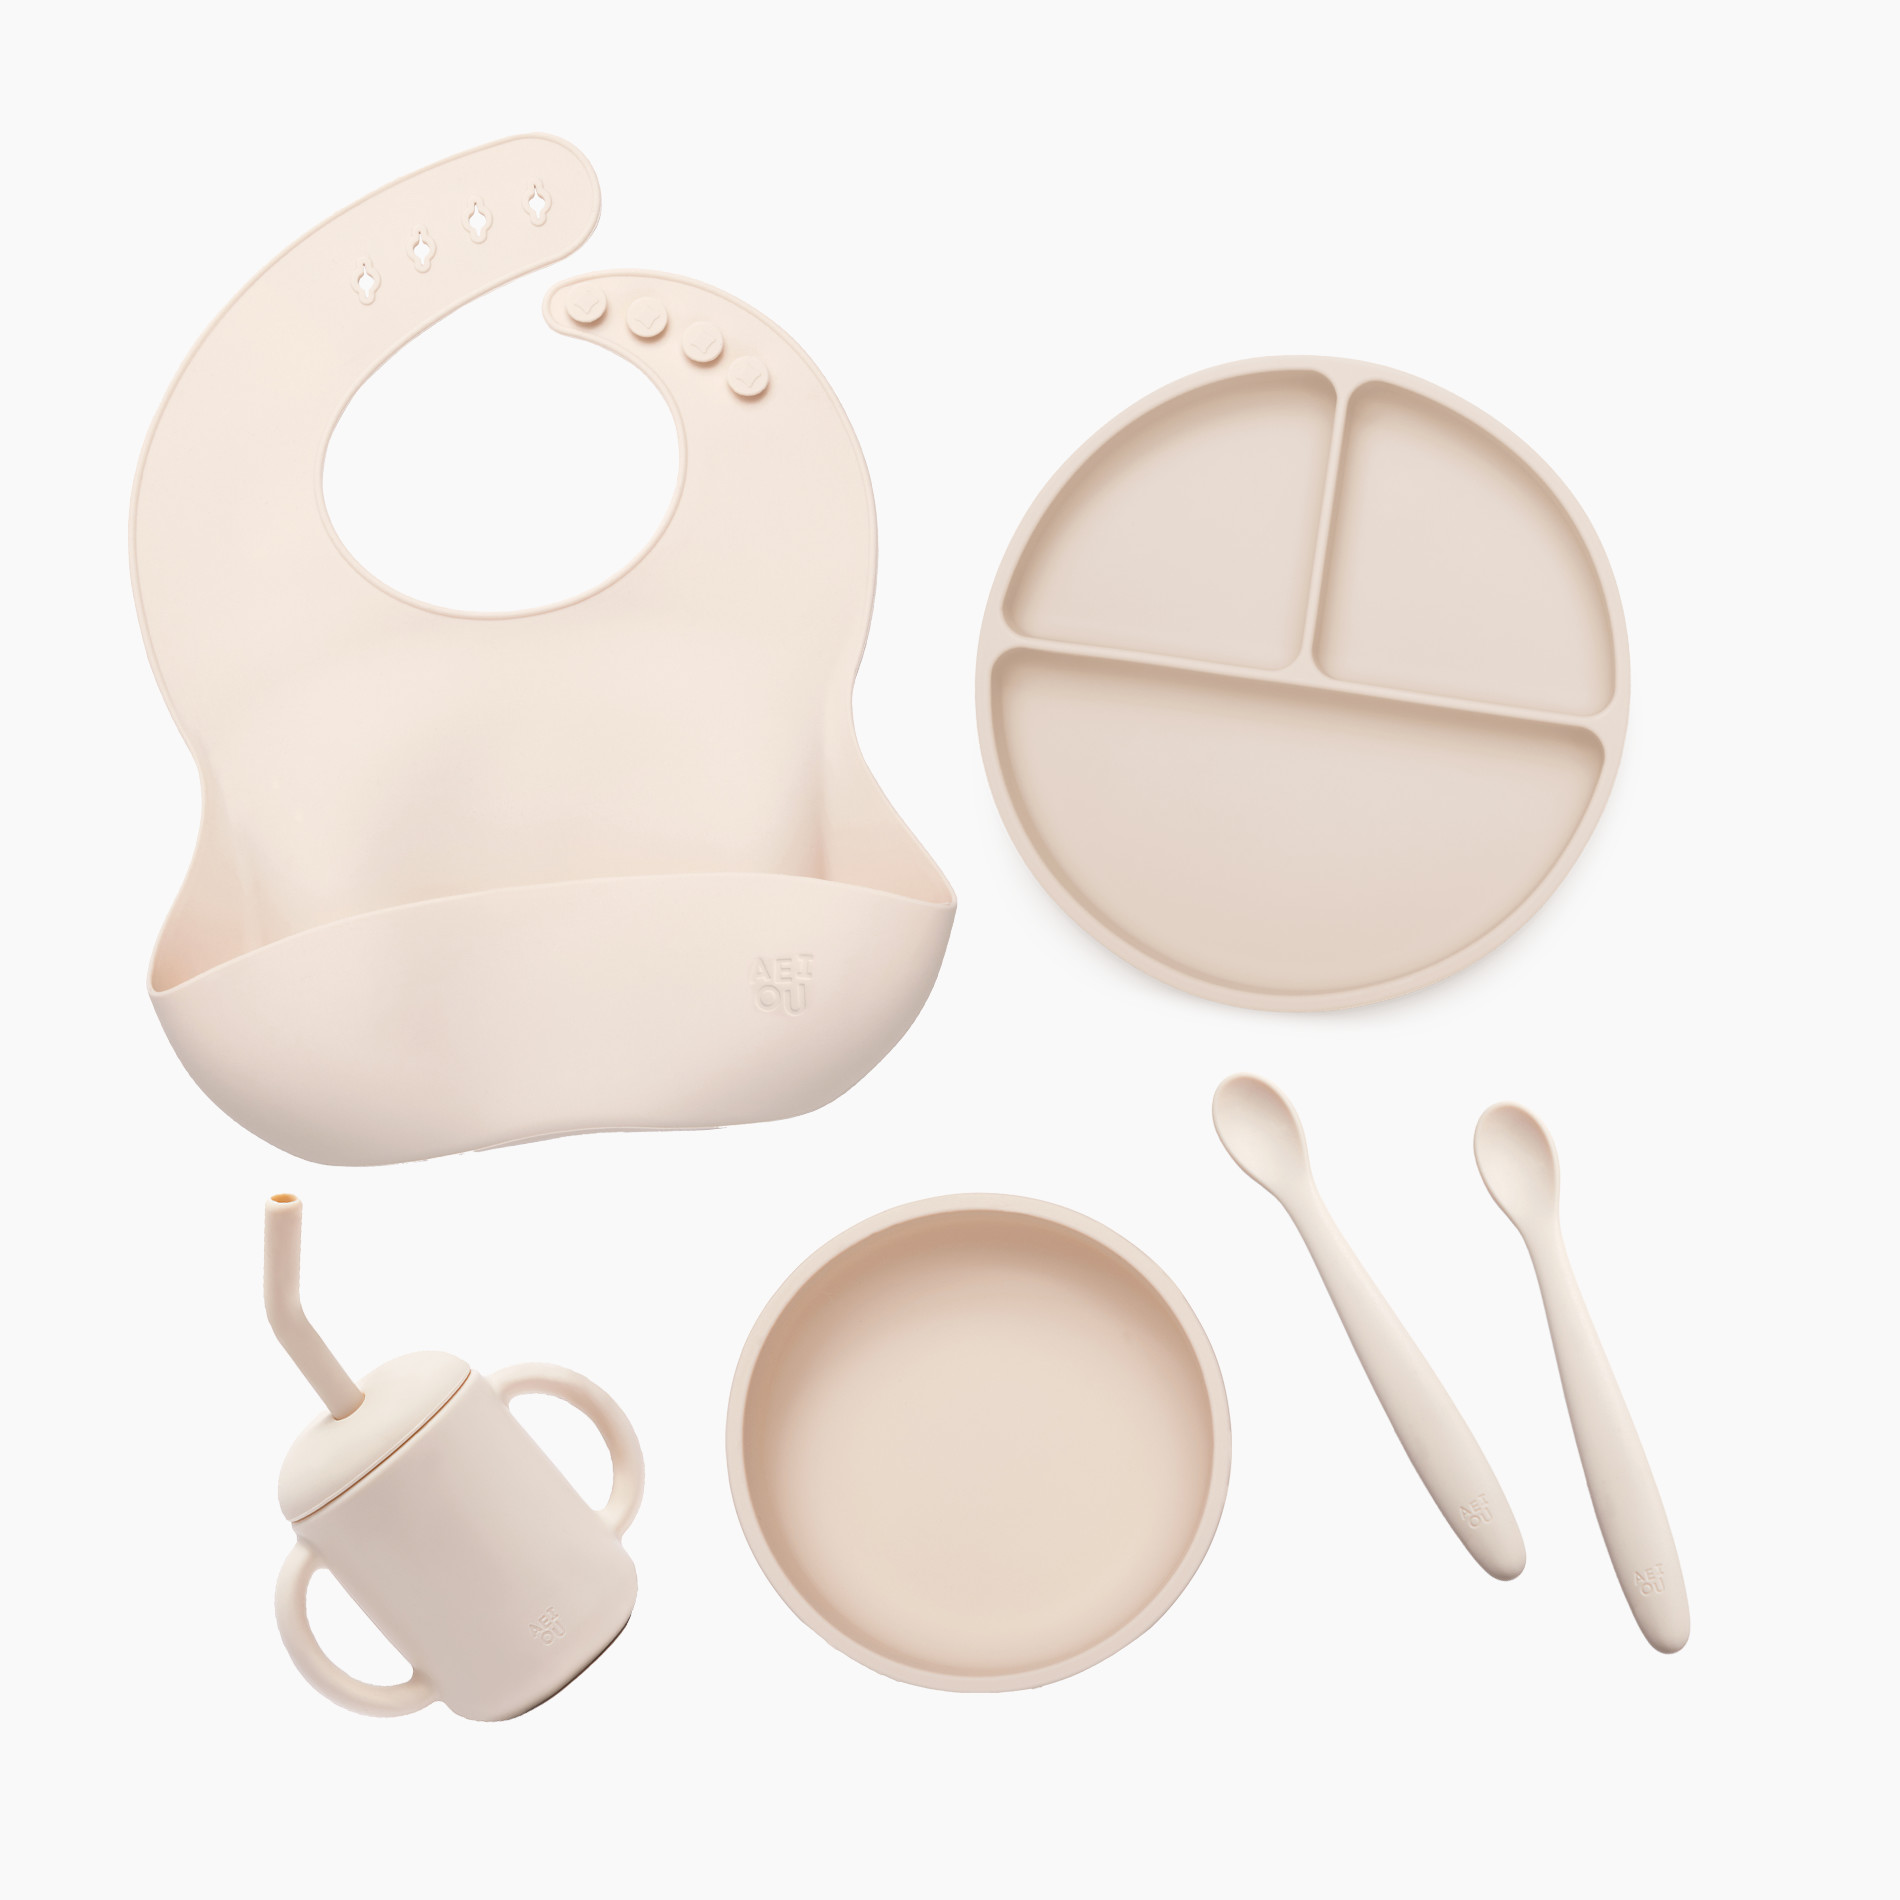 Lalo First Bites Silicone Baby Feeding Set - Baby Led Weaning Supplies -  Non-Toxic Silicone - Includes 2 Bibs, 2 Spoons, Training Cup, Suction Plate